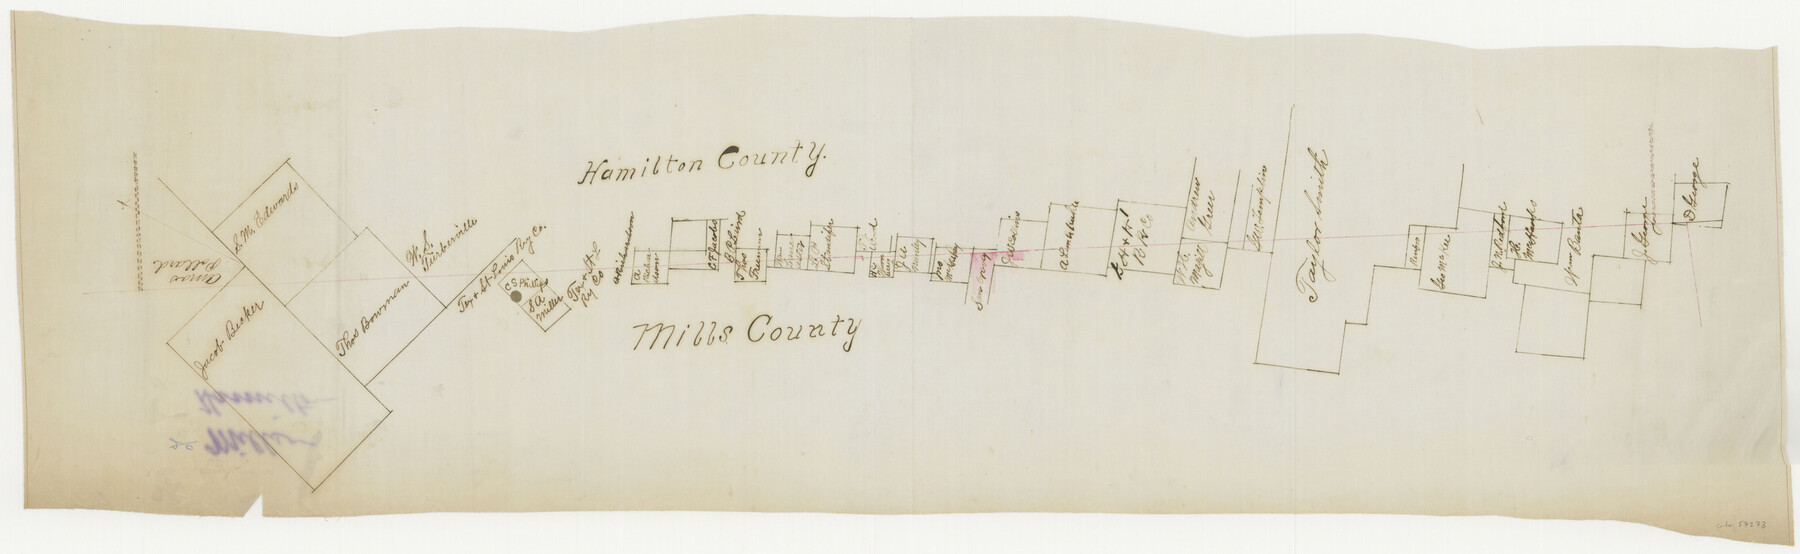 57273, Mills County Boundary File 1a, General Map Collection